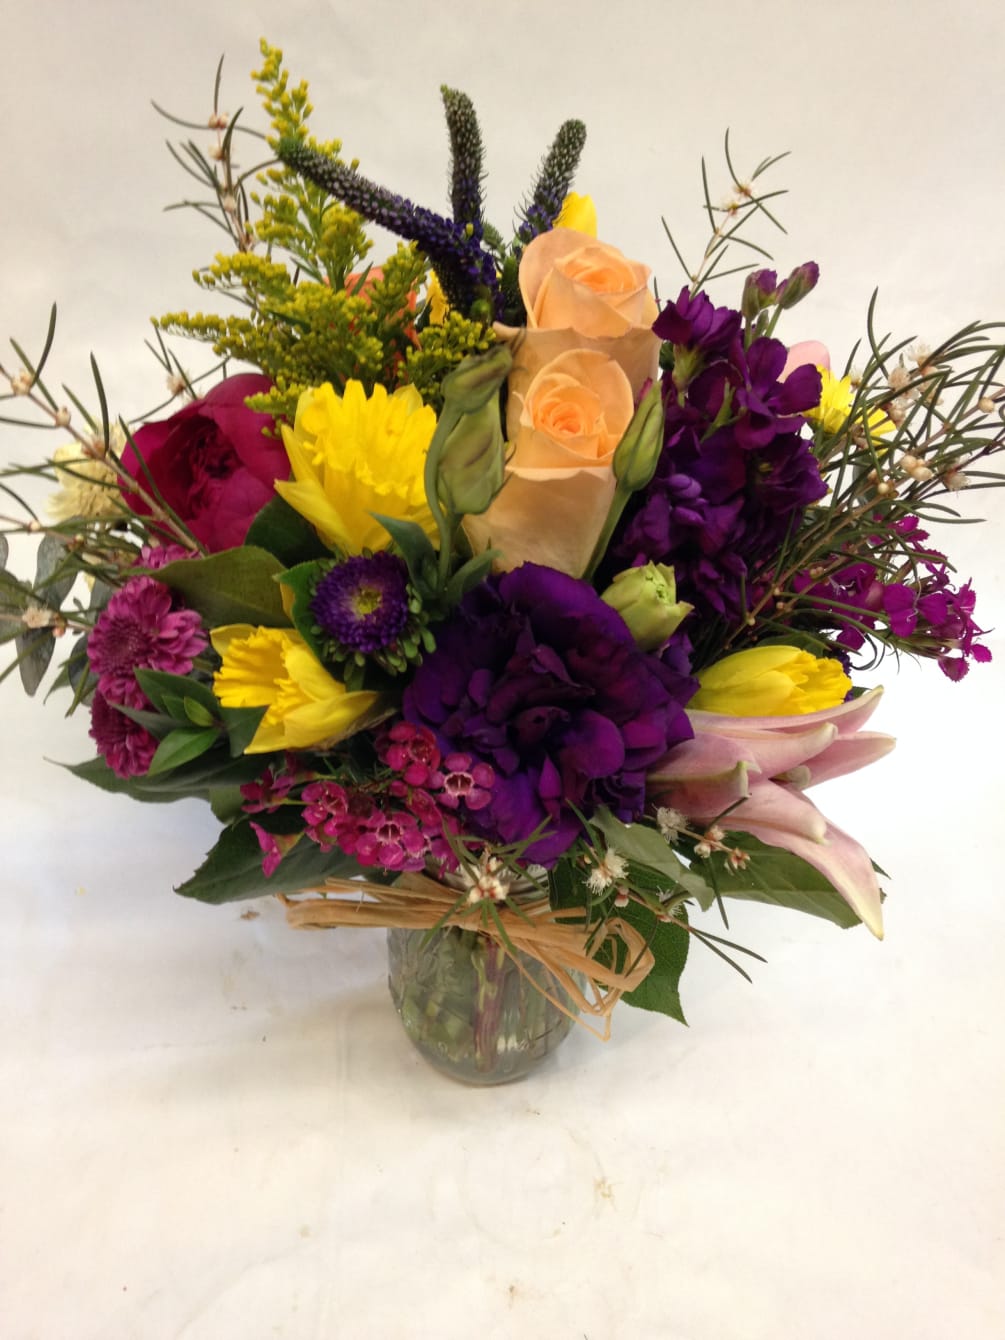 Celebrate Spring with this mason jar arrangement full of spring flowers including